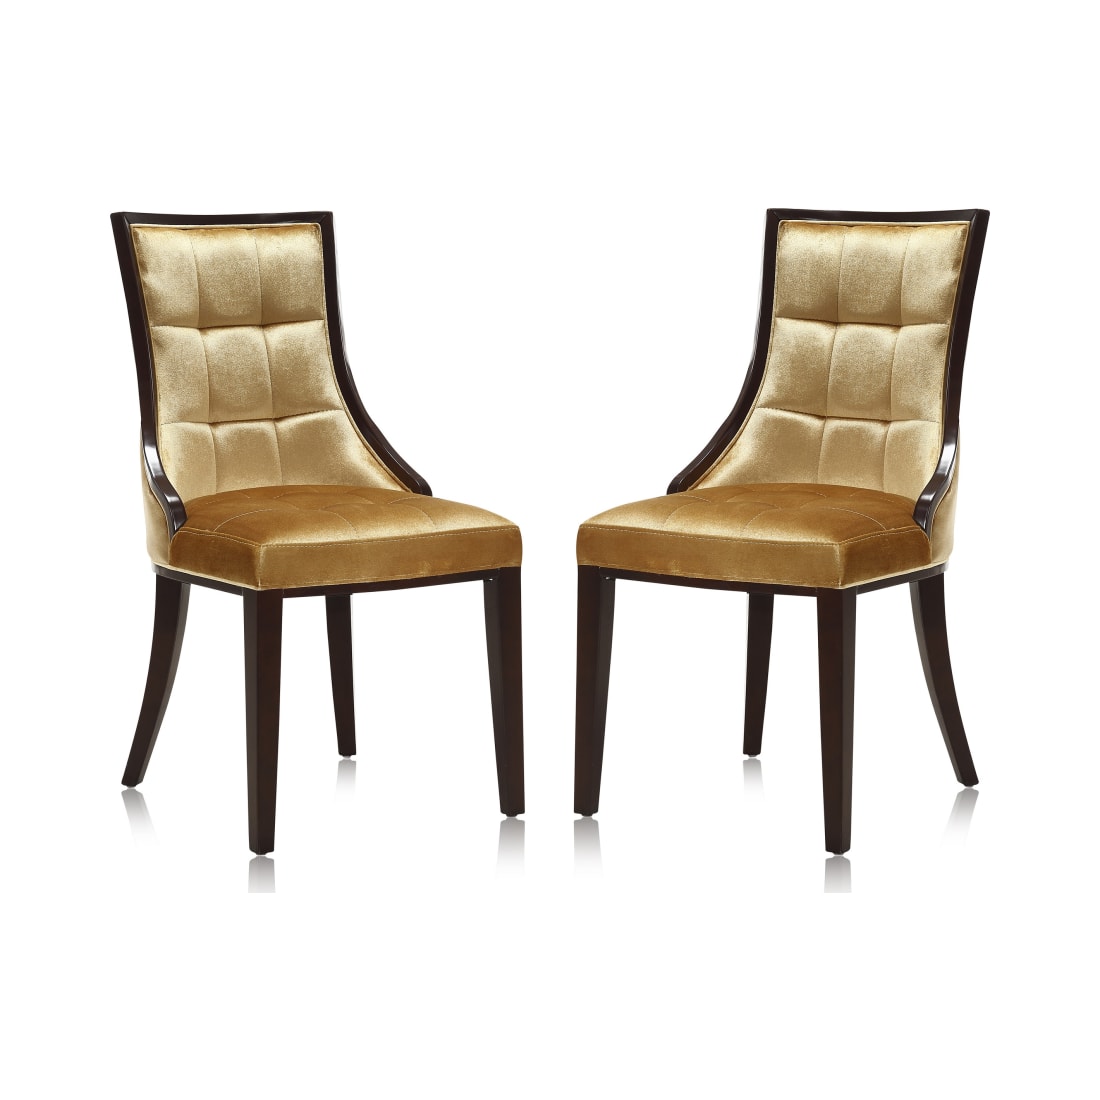 Fifth Avenue Velvet Dining Chair (Set of Two) in Antique Gold and Walnut